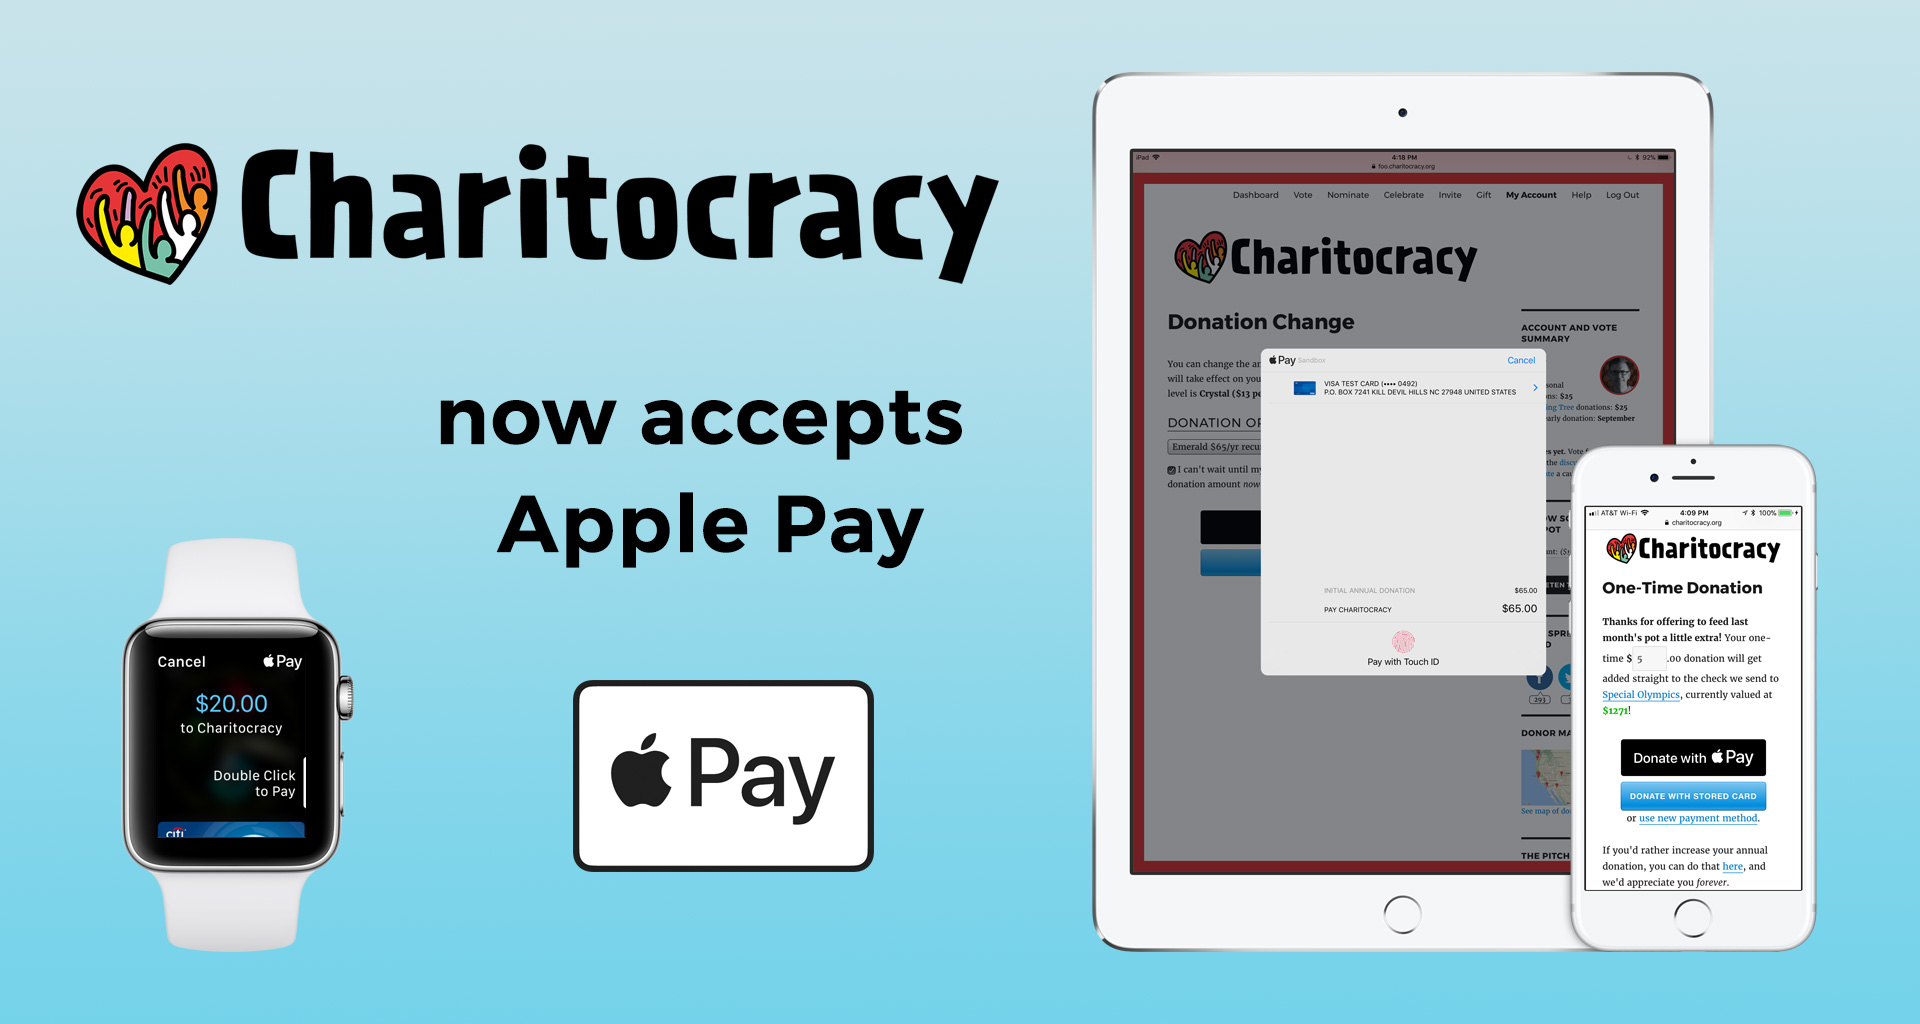 Charitocracy now accepts Apple Pay